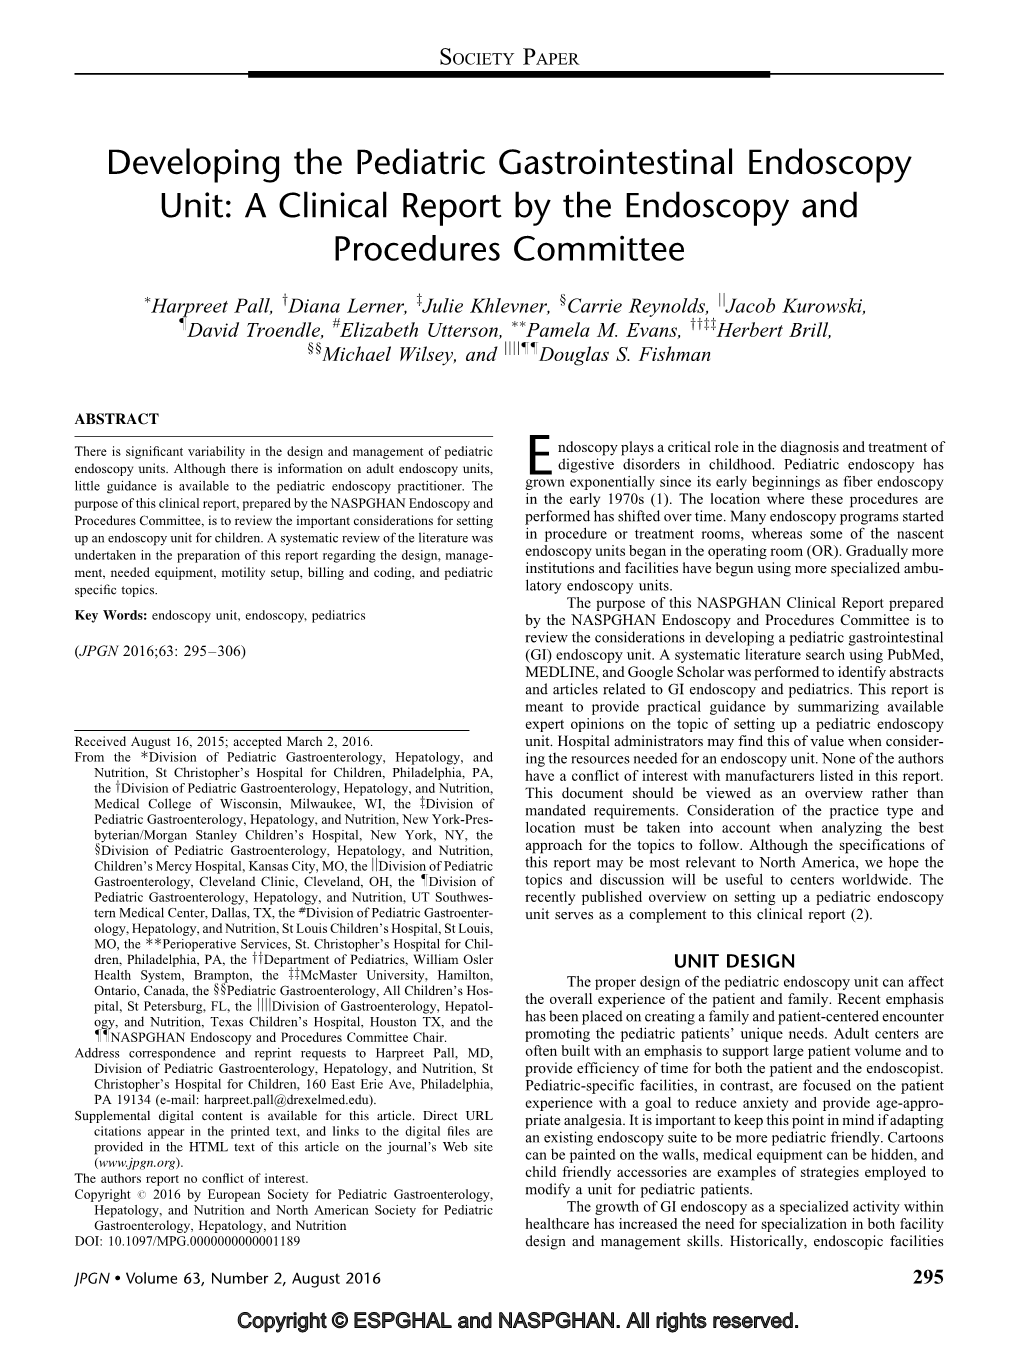 Developing the Pediatric Gastrointestinal Endoscopy Unit: a Clinical Report by the Endoscopy and Procedures Committee